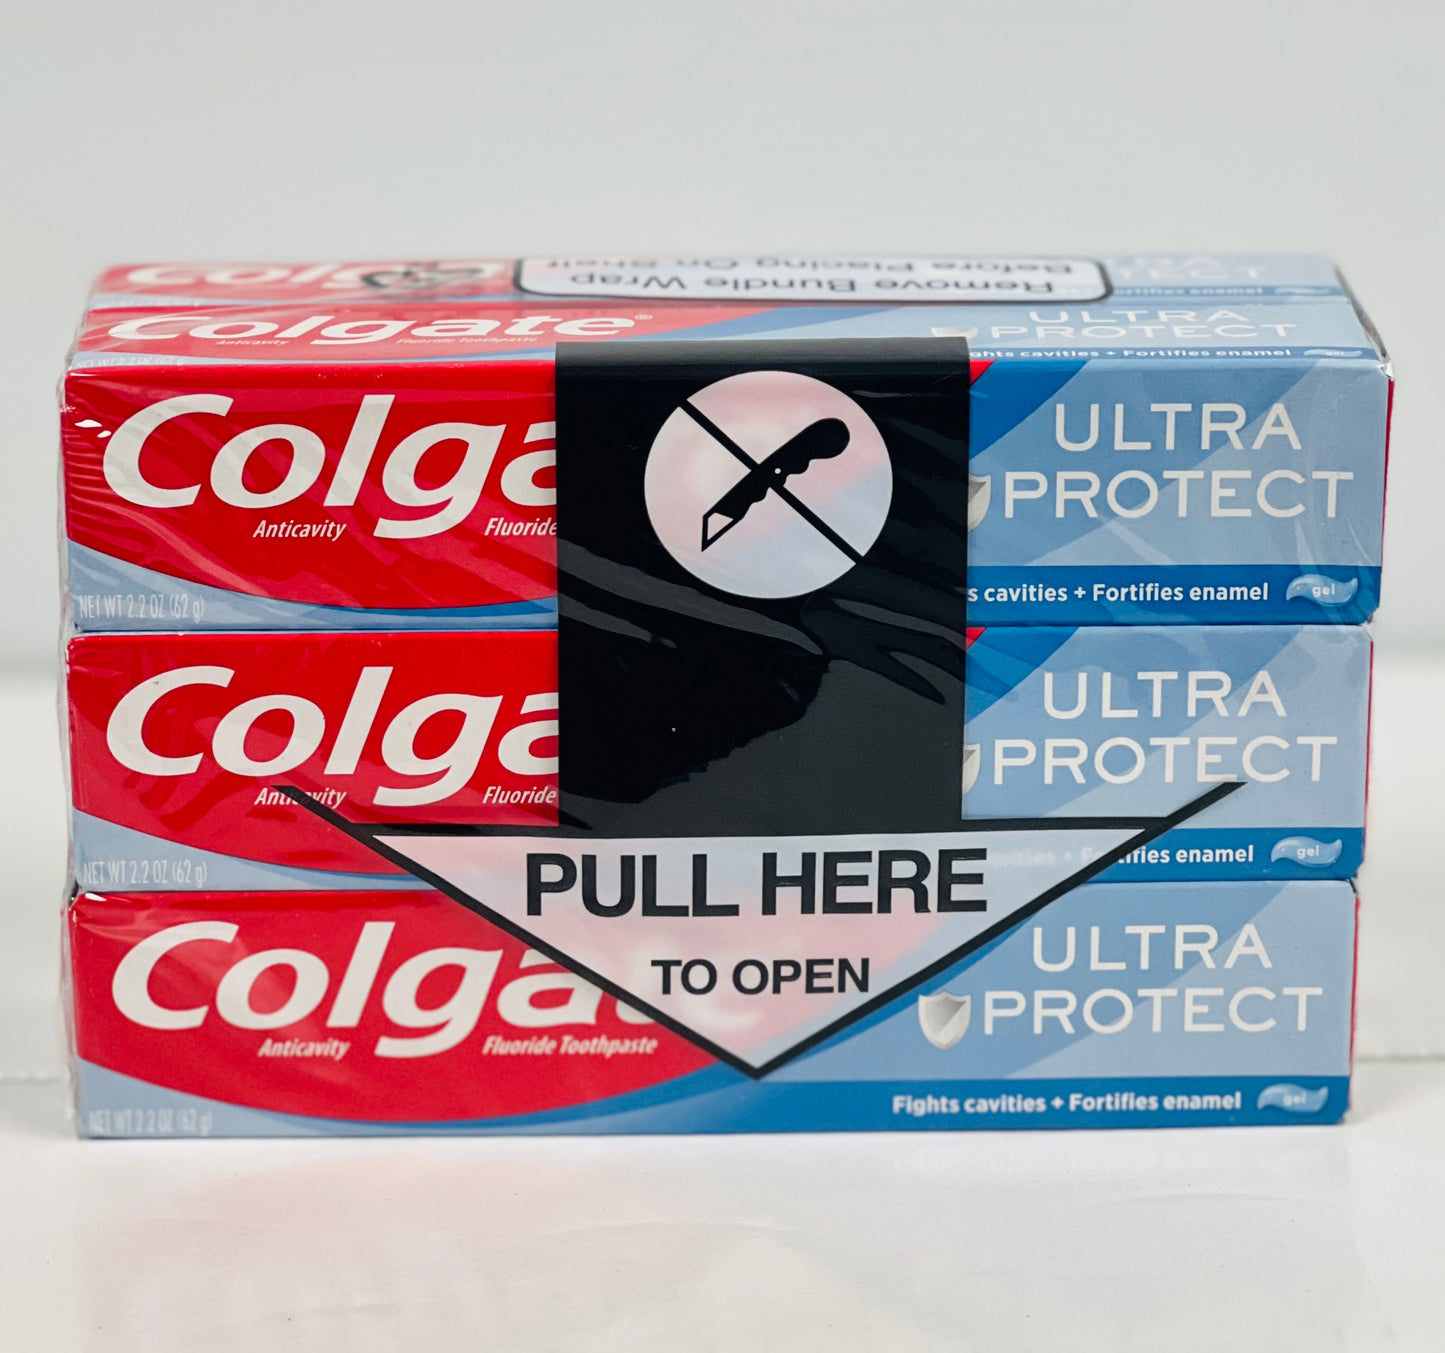 Colgate Ultra Protect Toothpaste